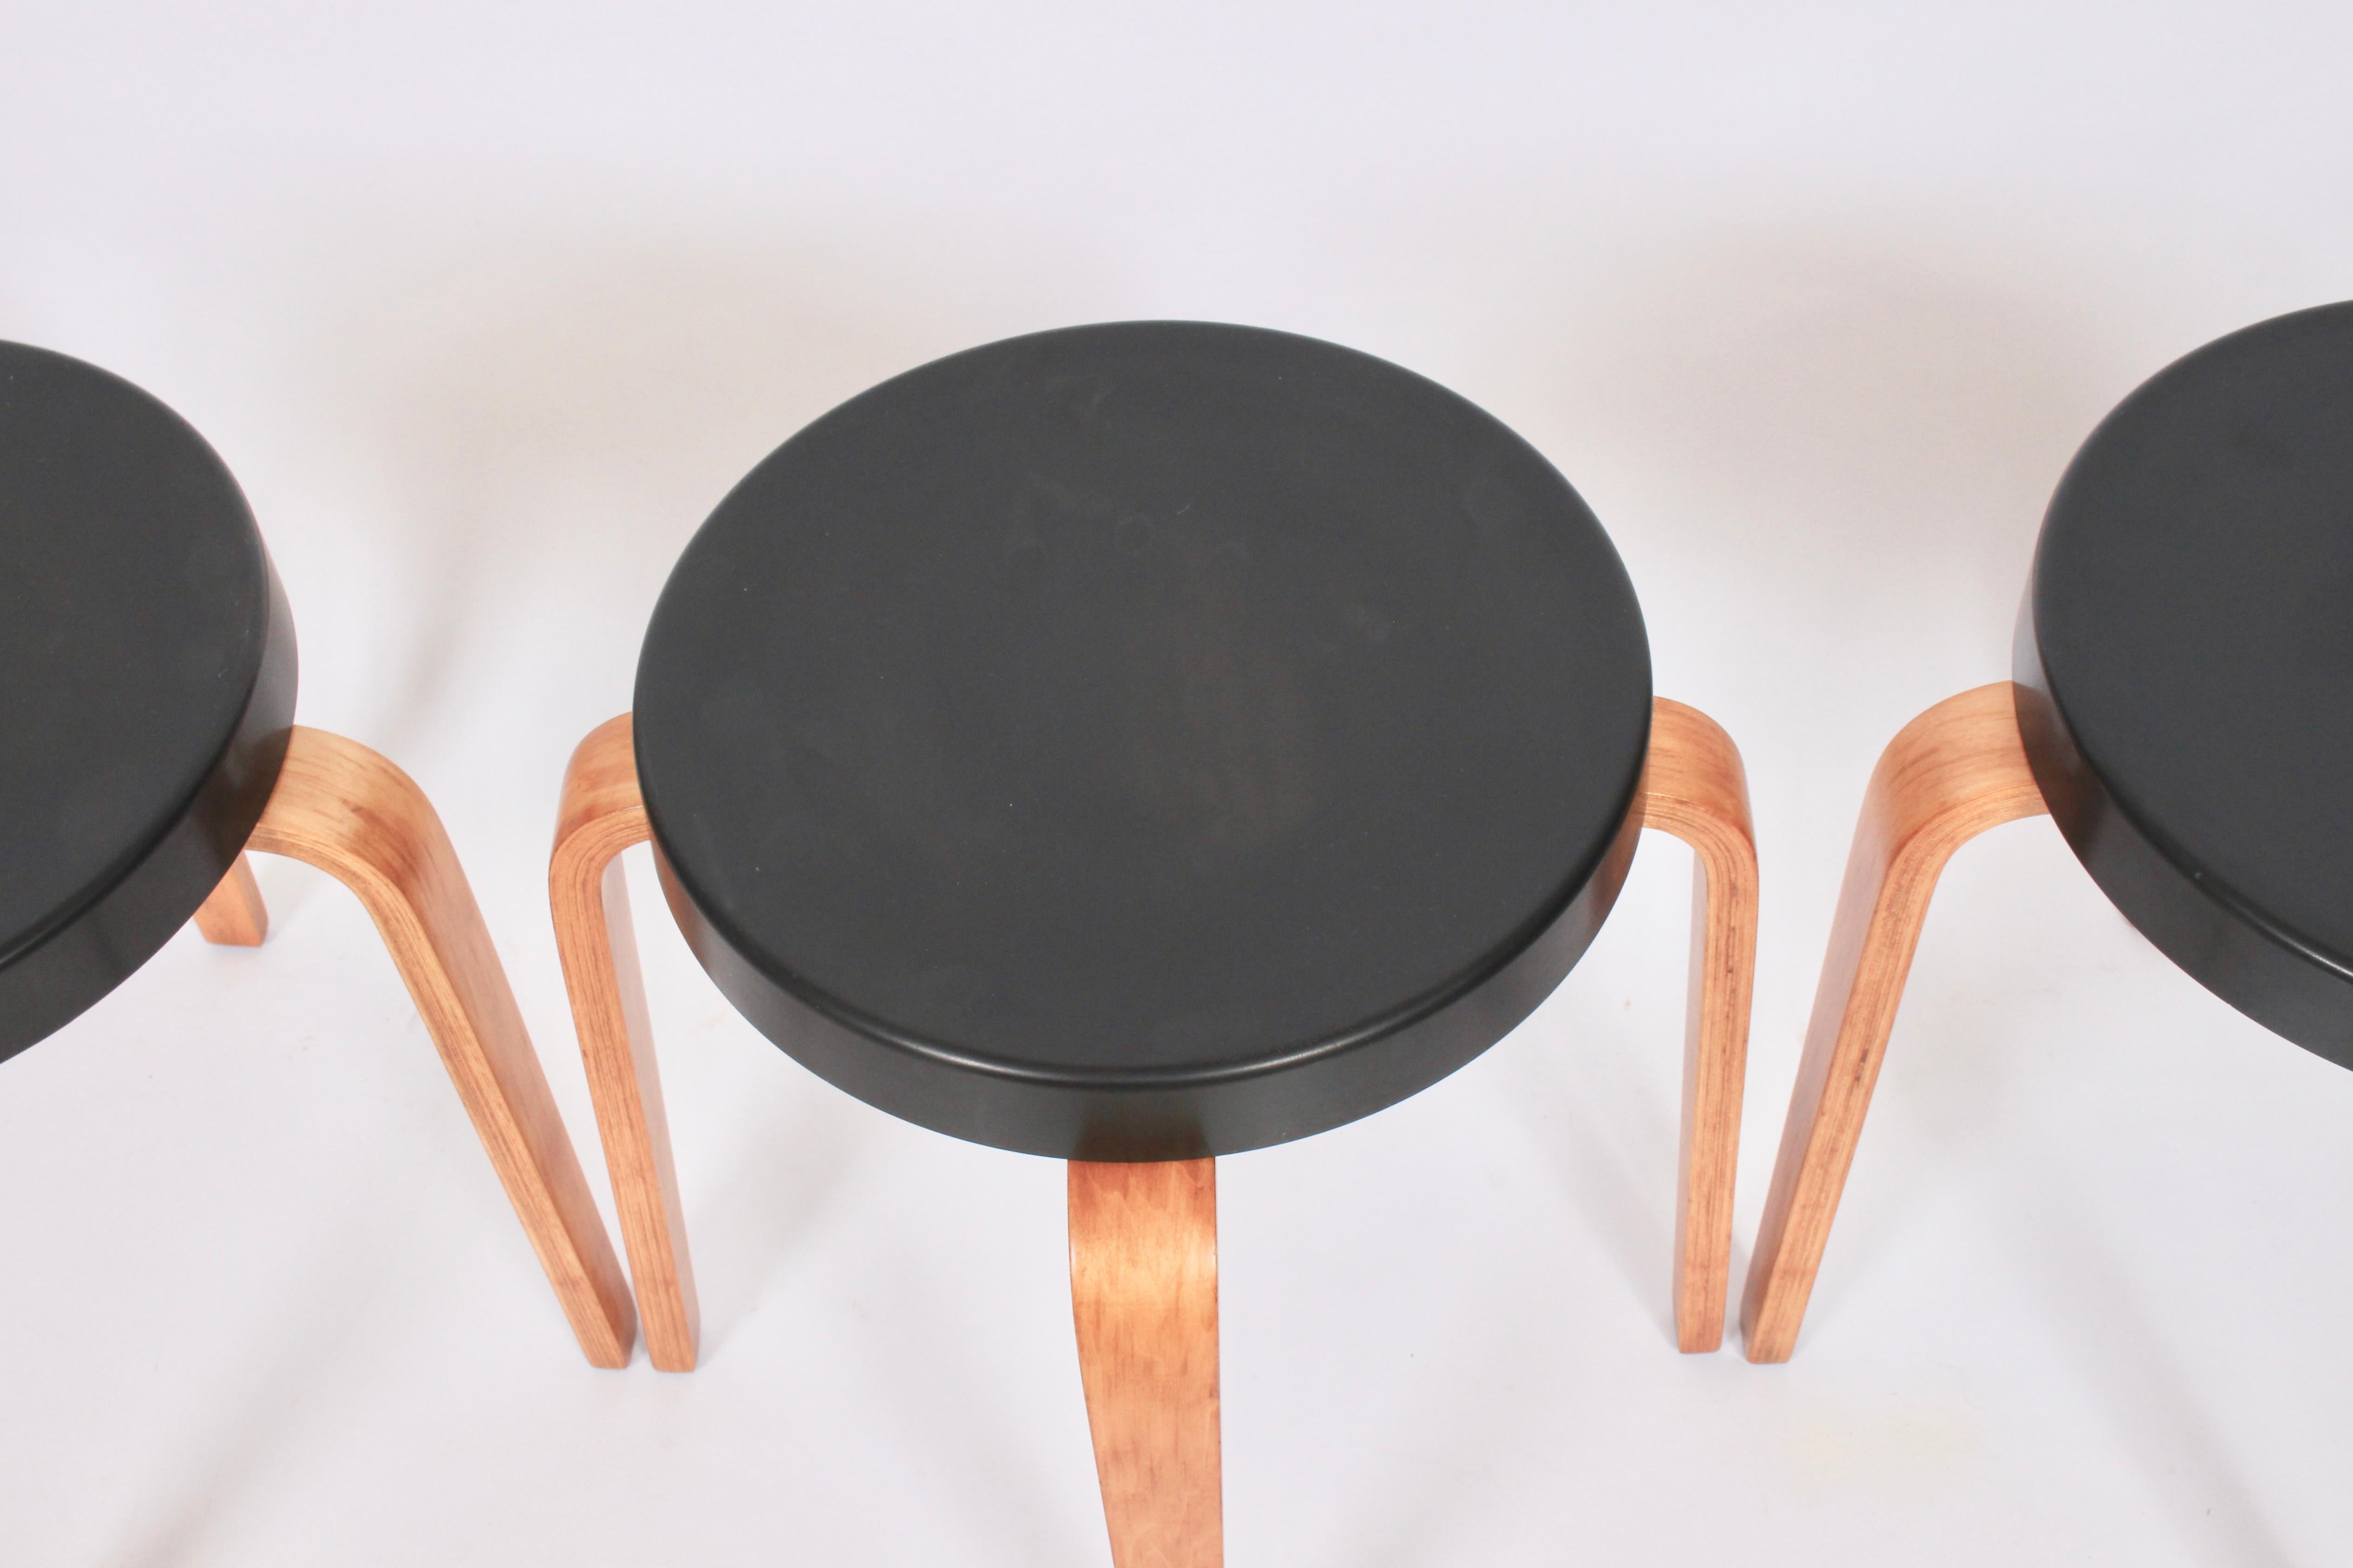 American Set of 4 Thonet Black Bakelite and Bentwood Stacking Stools, 1930s